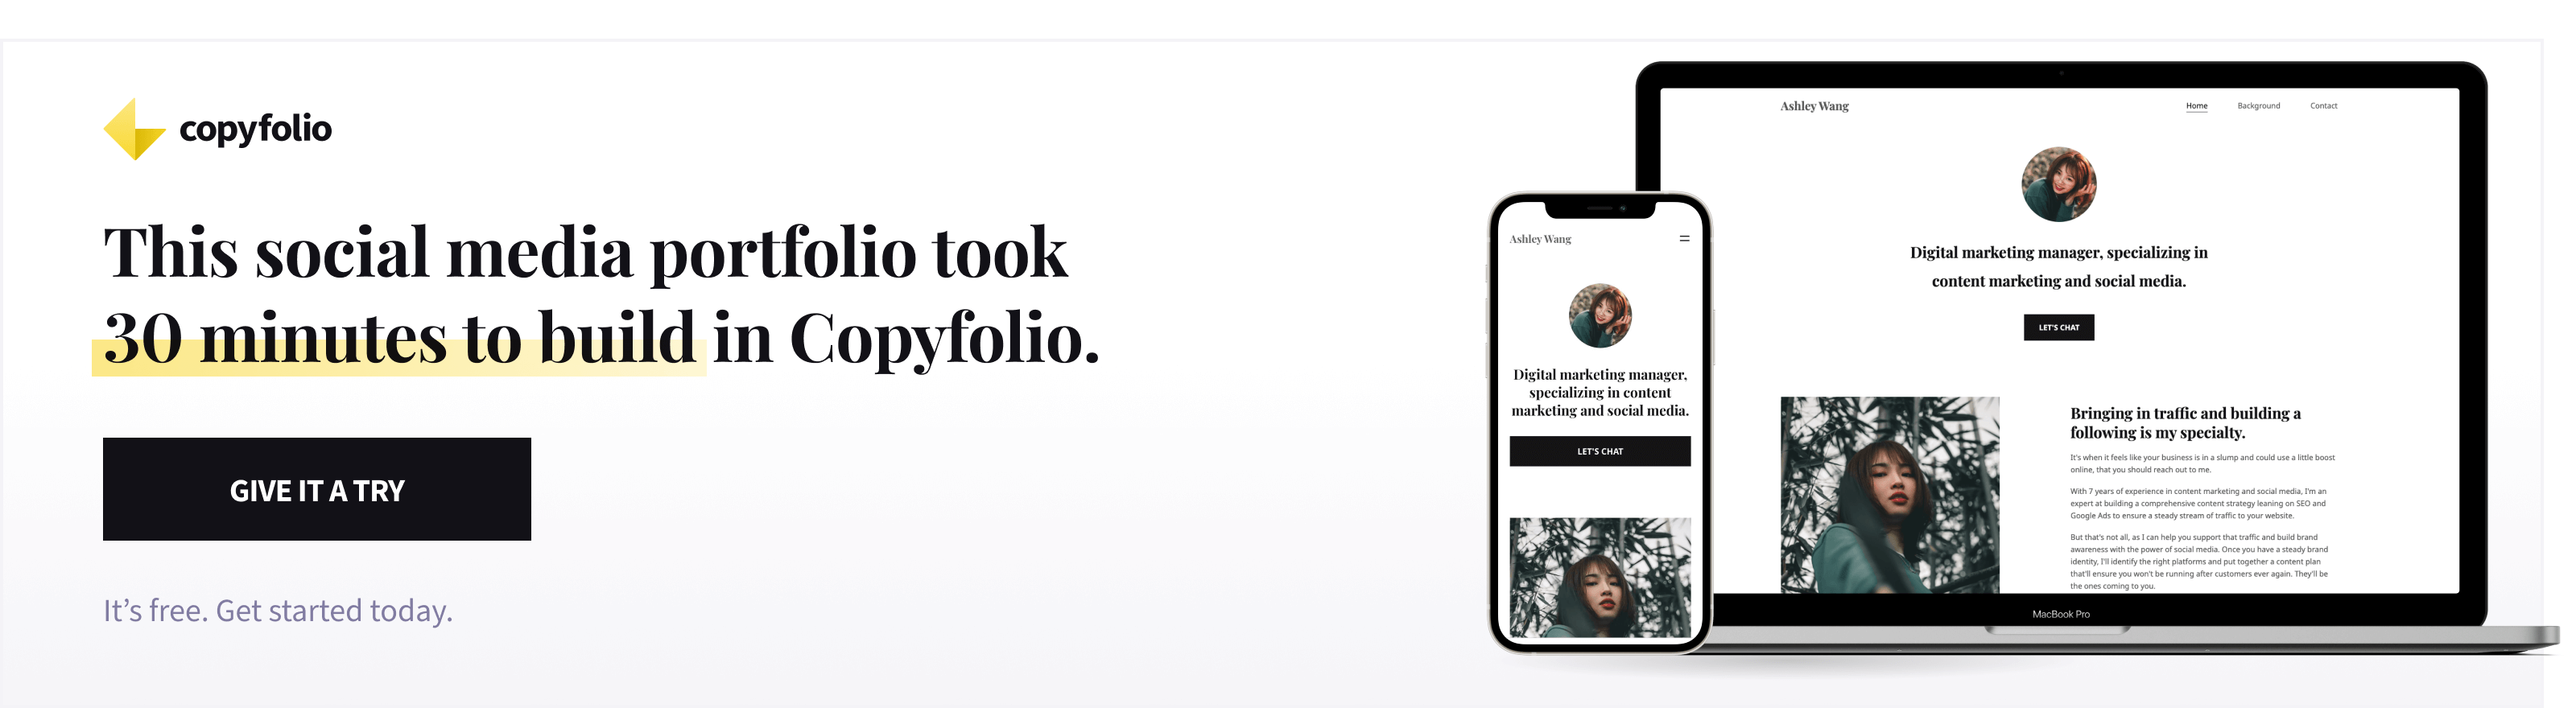 This social media portfolio took 30 minutes to build in Copyfolio. Give it a try, it's free. 